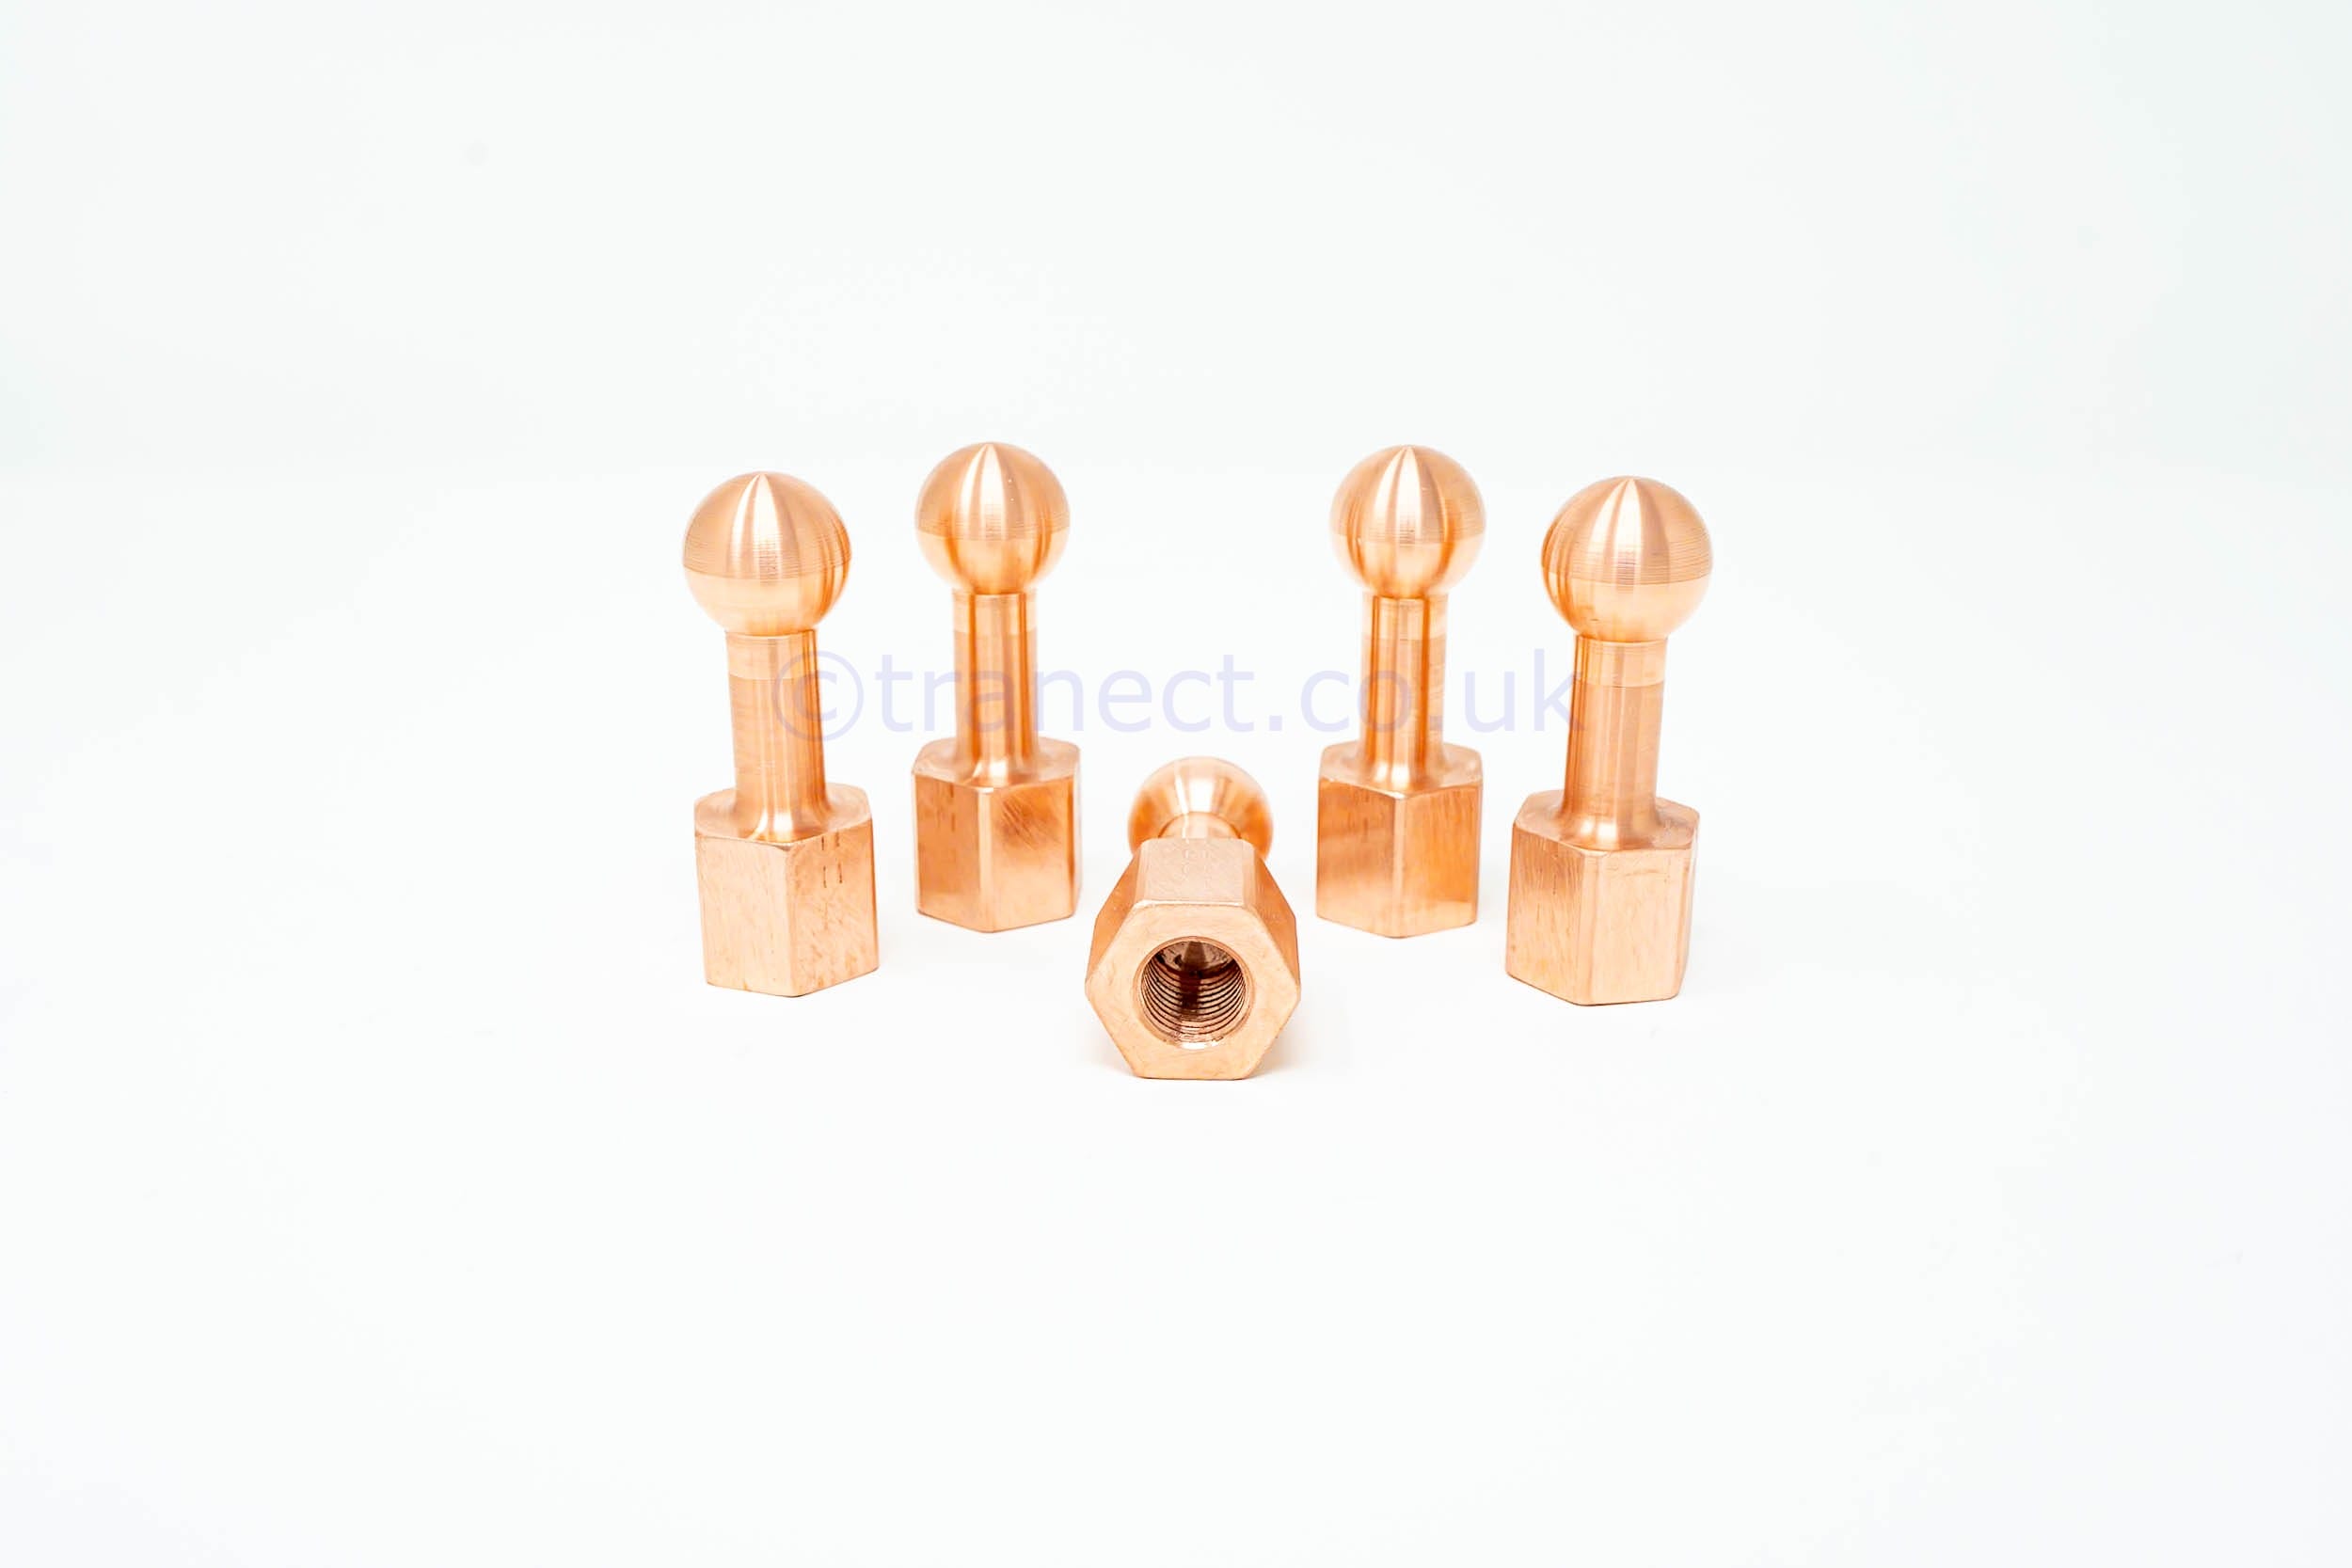 Copper earth pins for switchgear cubicles